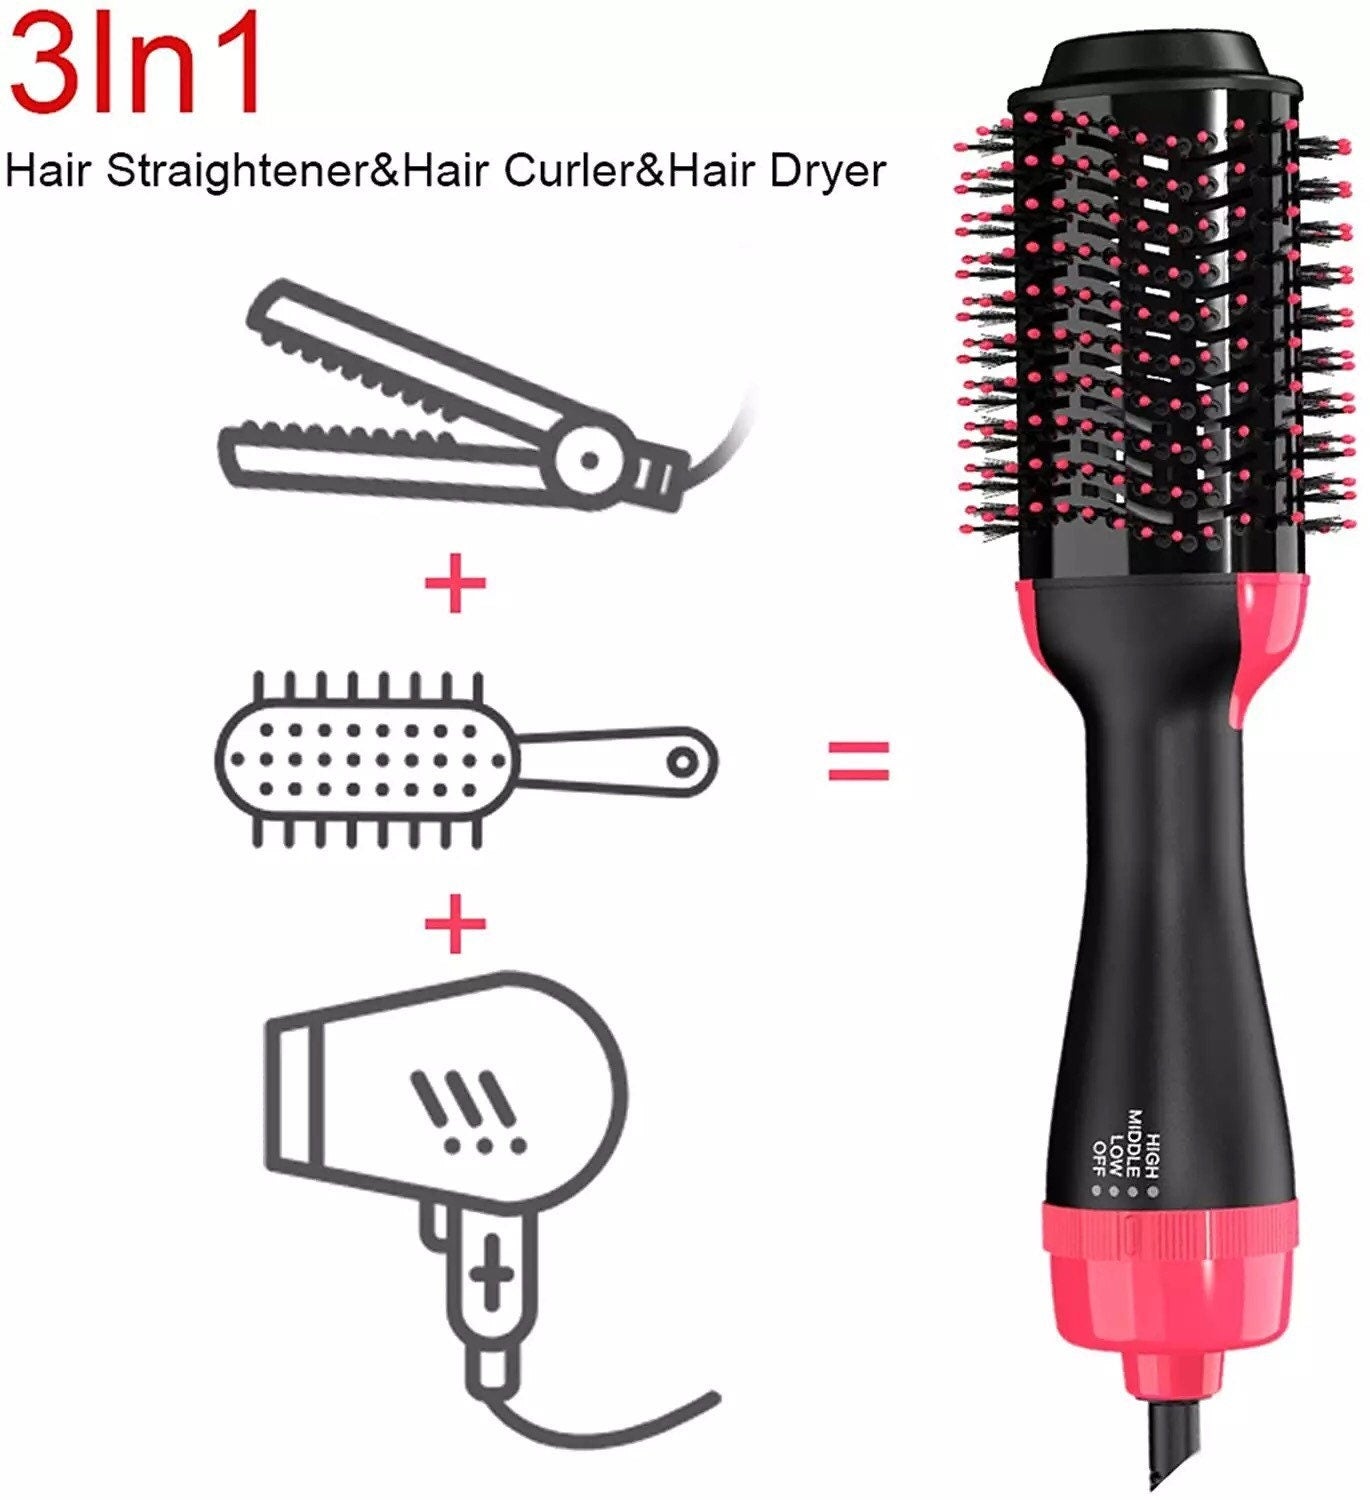 PRIVATE LABEL Wholesale Luxury PREMIUM quality Customizable 3-in-1 Hair Curling Brush/Blow-dryer/Straightener, Multifunctional Styler 300pcs